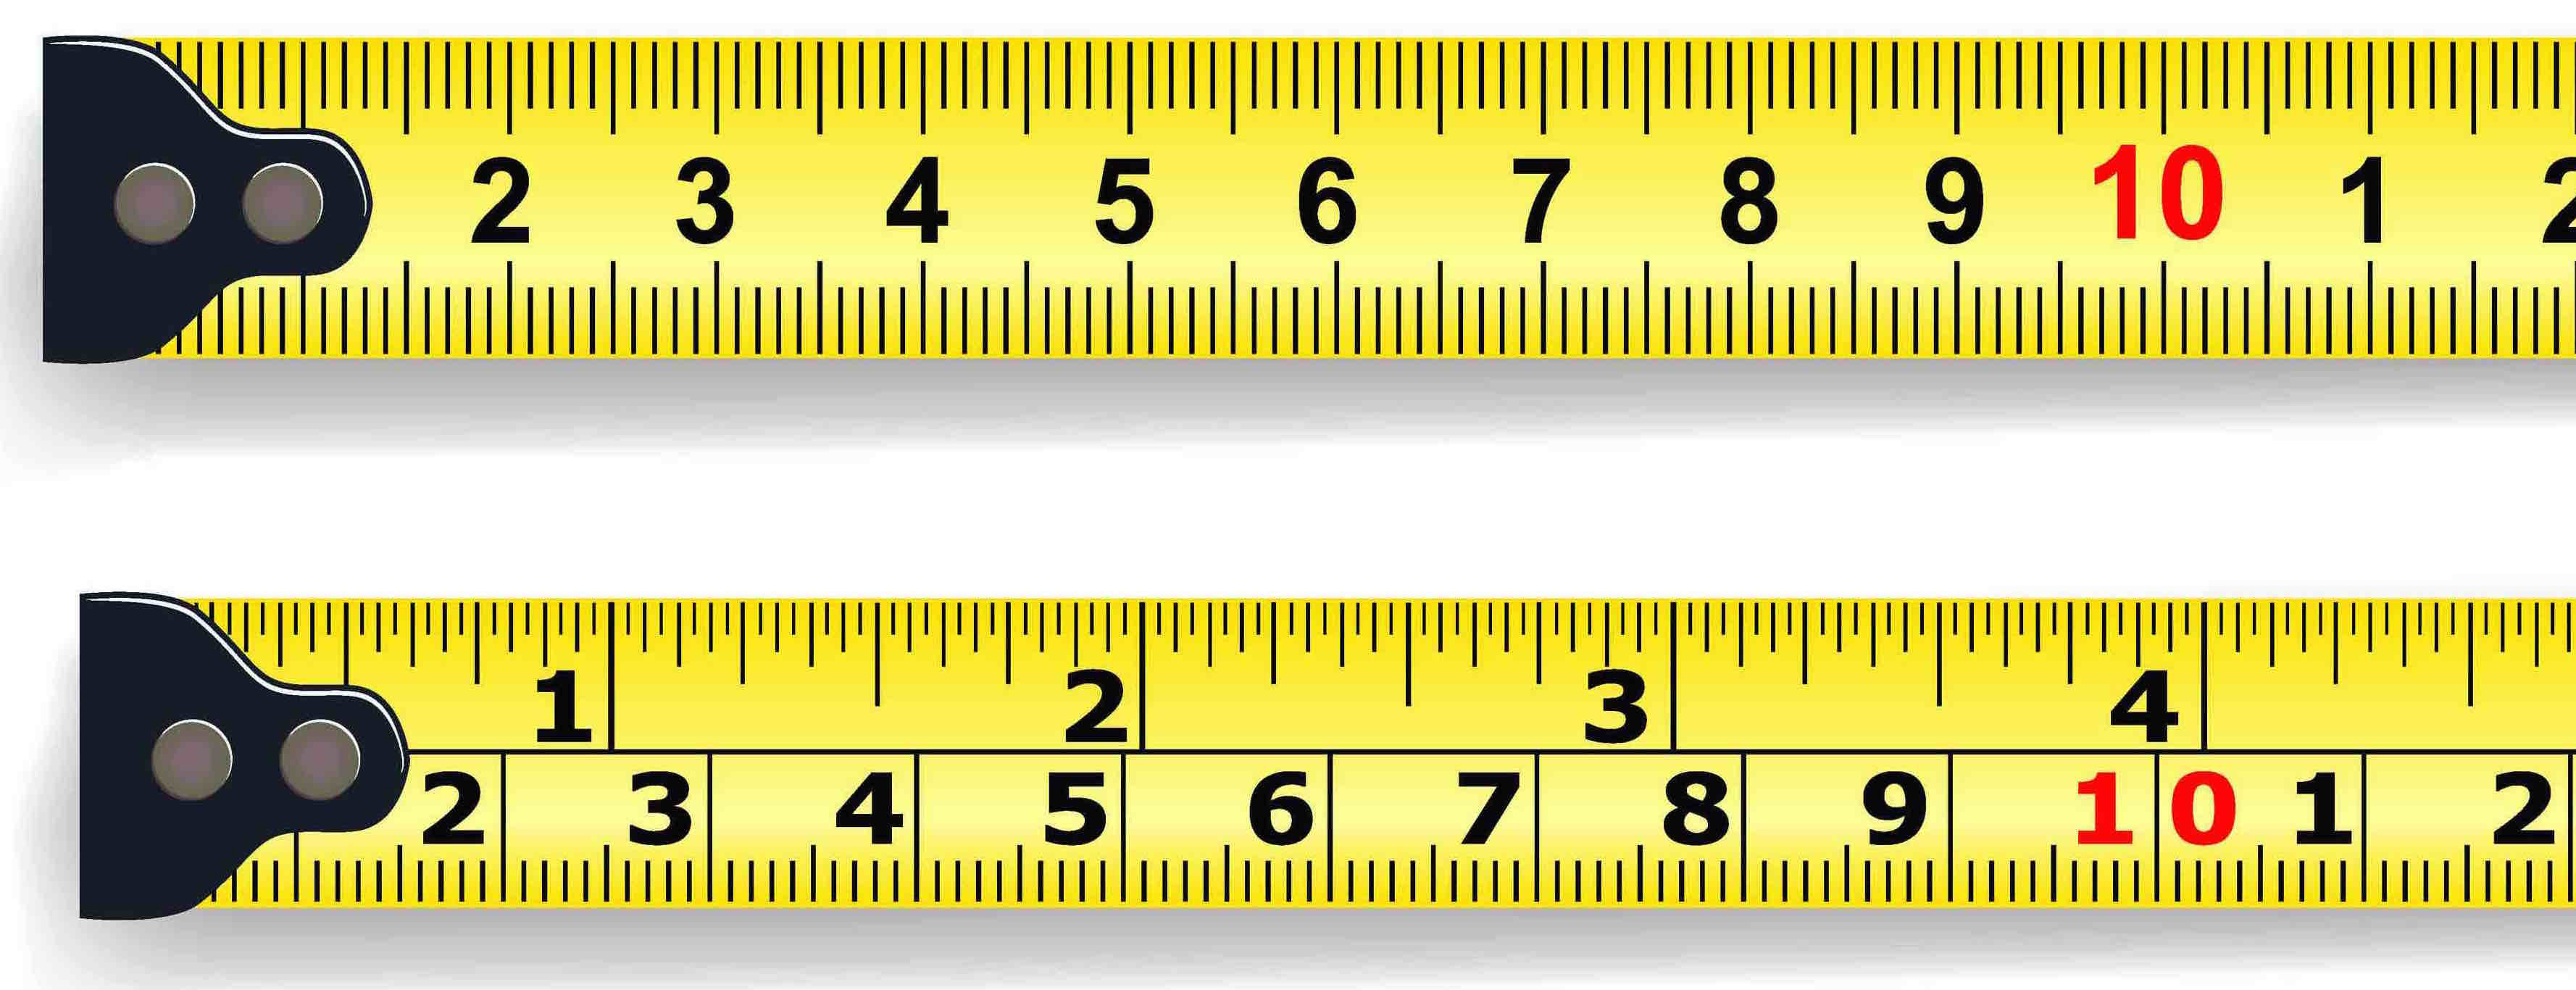 how many inches is 25 cm